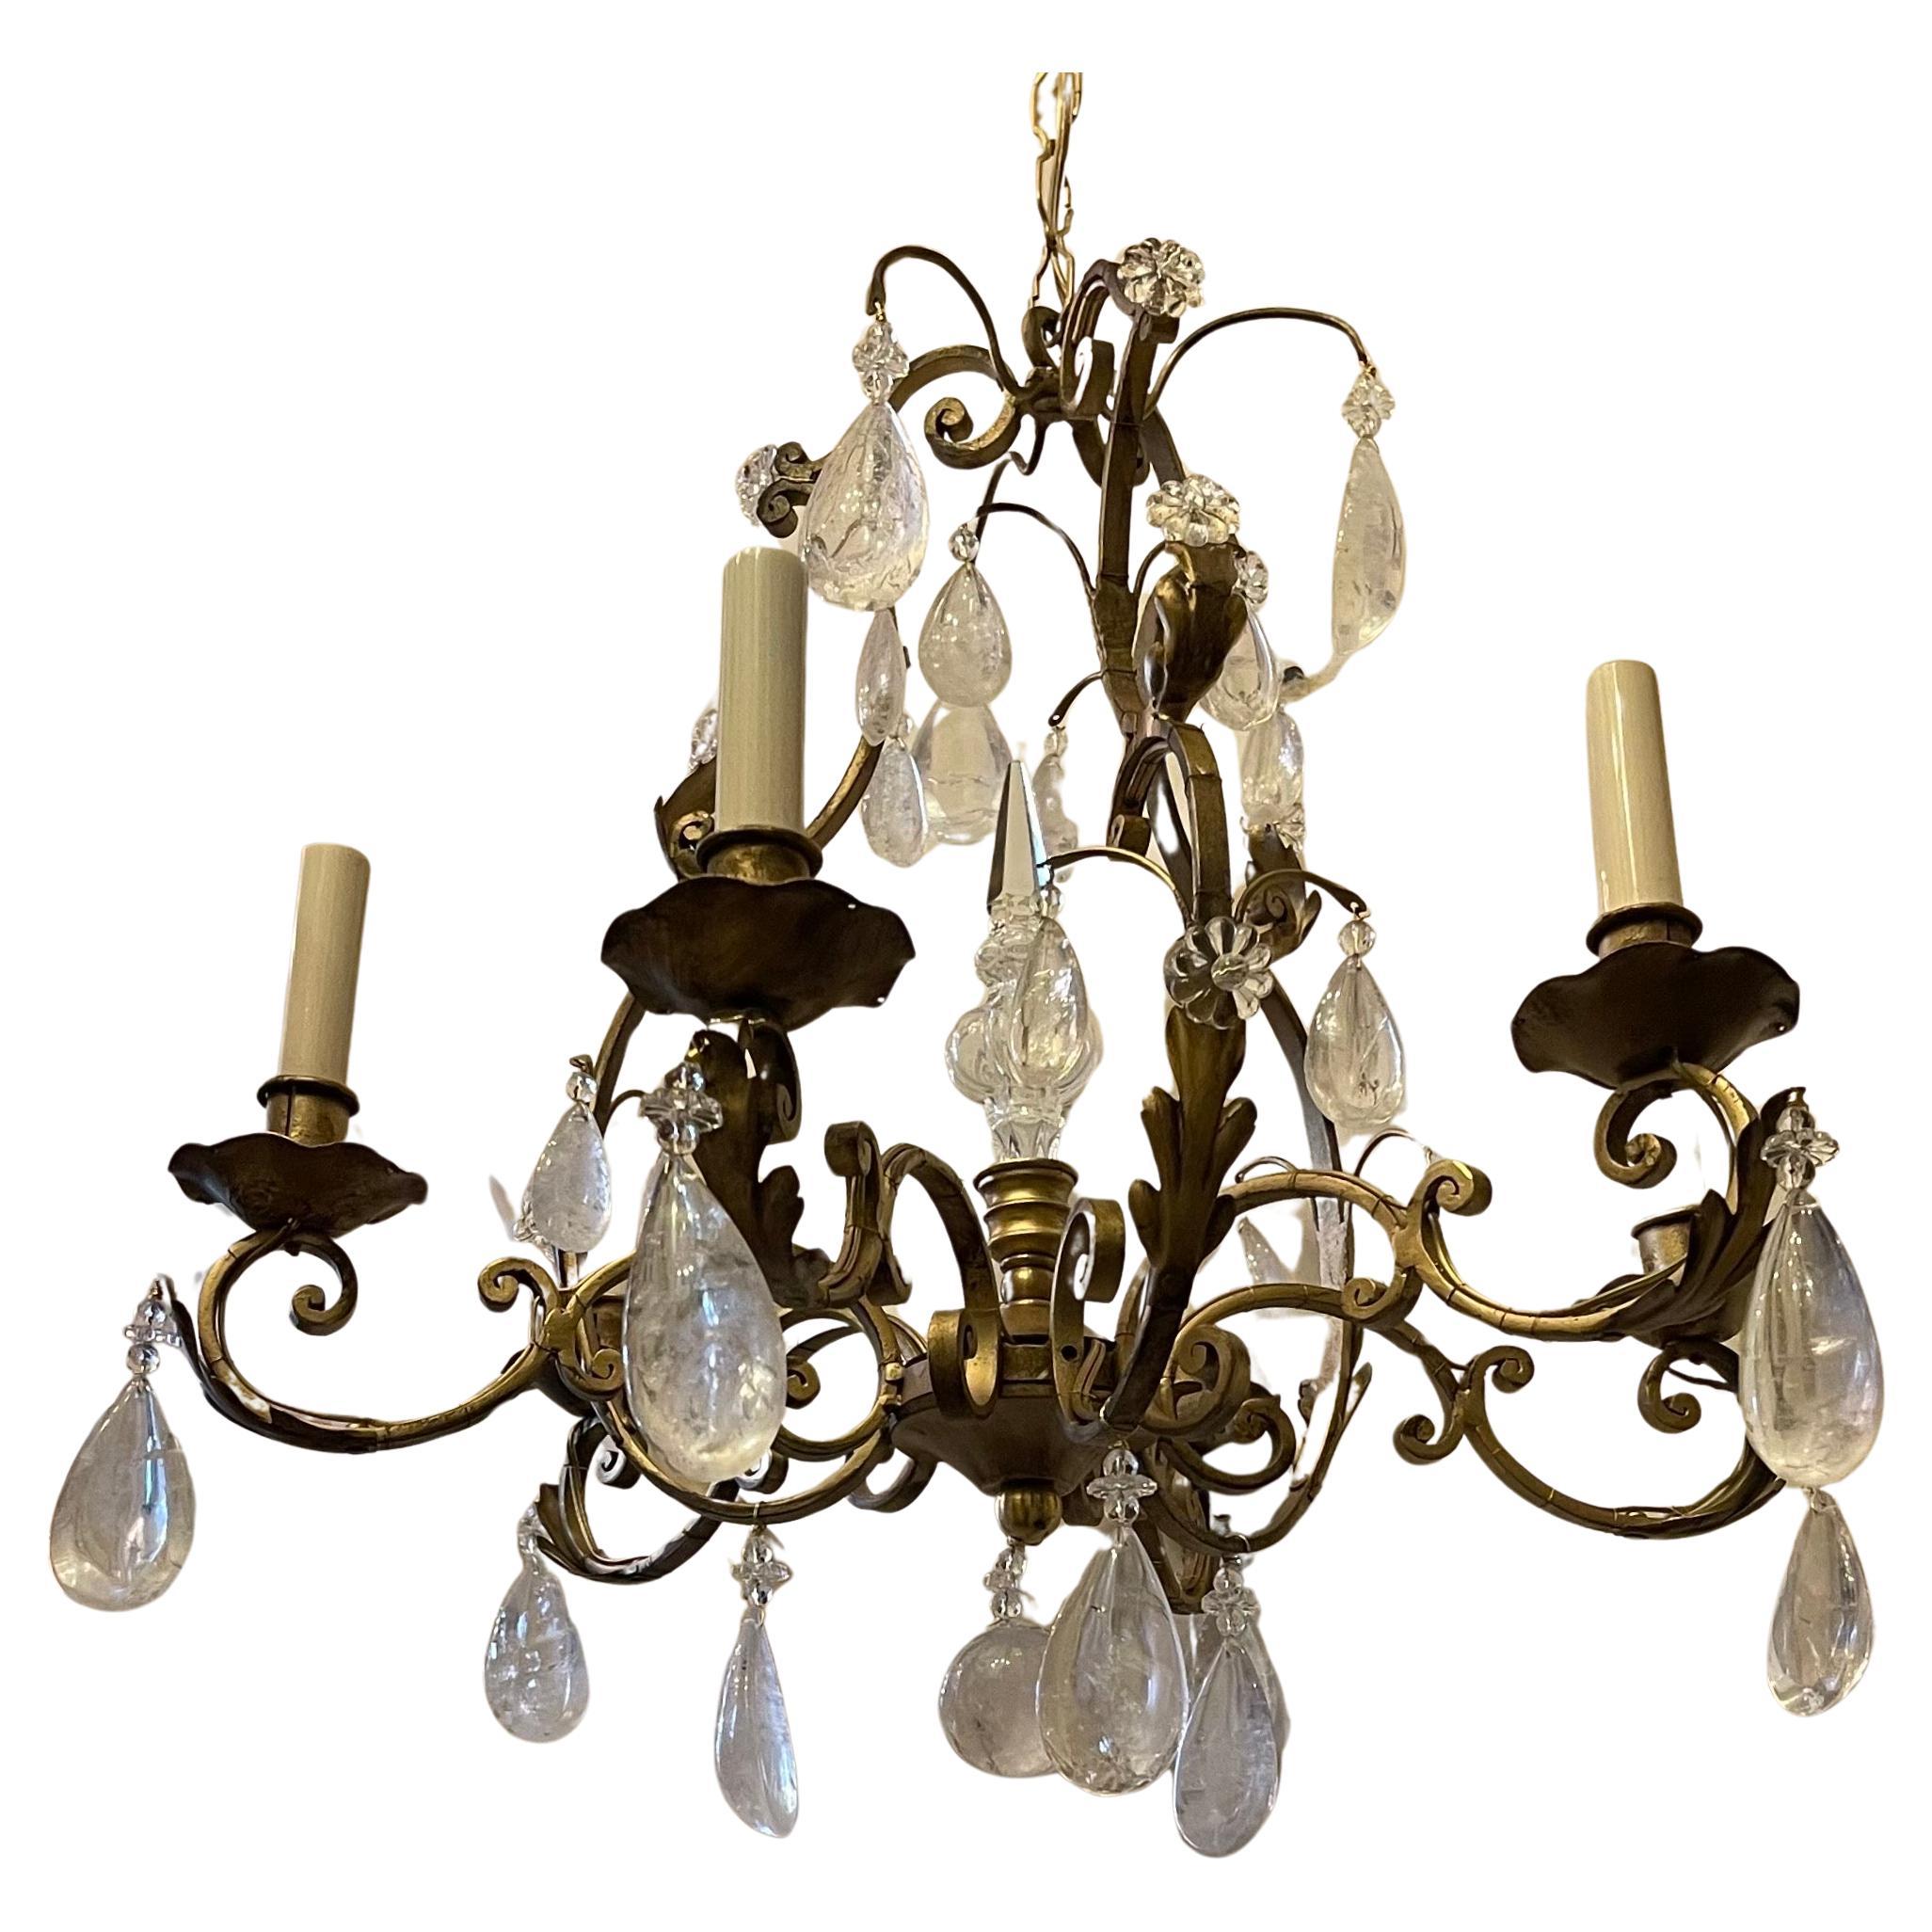 A Wonderful Petite Six Candelabra Light In The Style & Manor Of Baguès With Rock Crystal Drops Suspended From A Gold Gilt French Bird Cage Chandelier Frame, Completely Rewired With New Sockets For US Accompanied By Chain, Canopy And Mounting